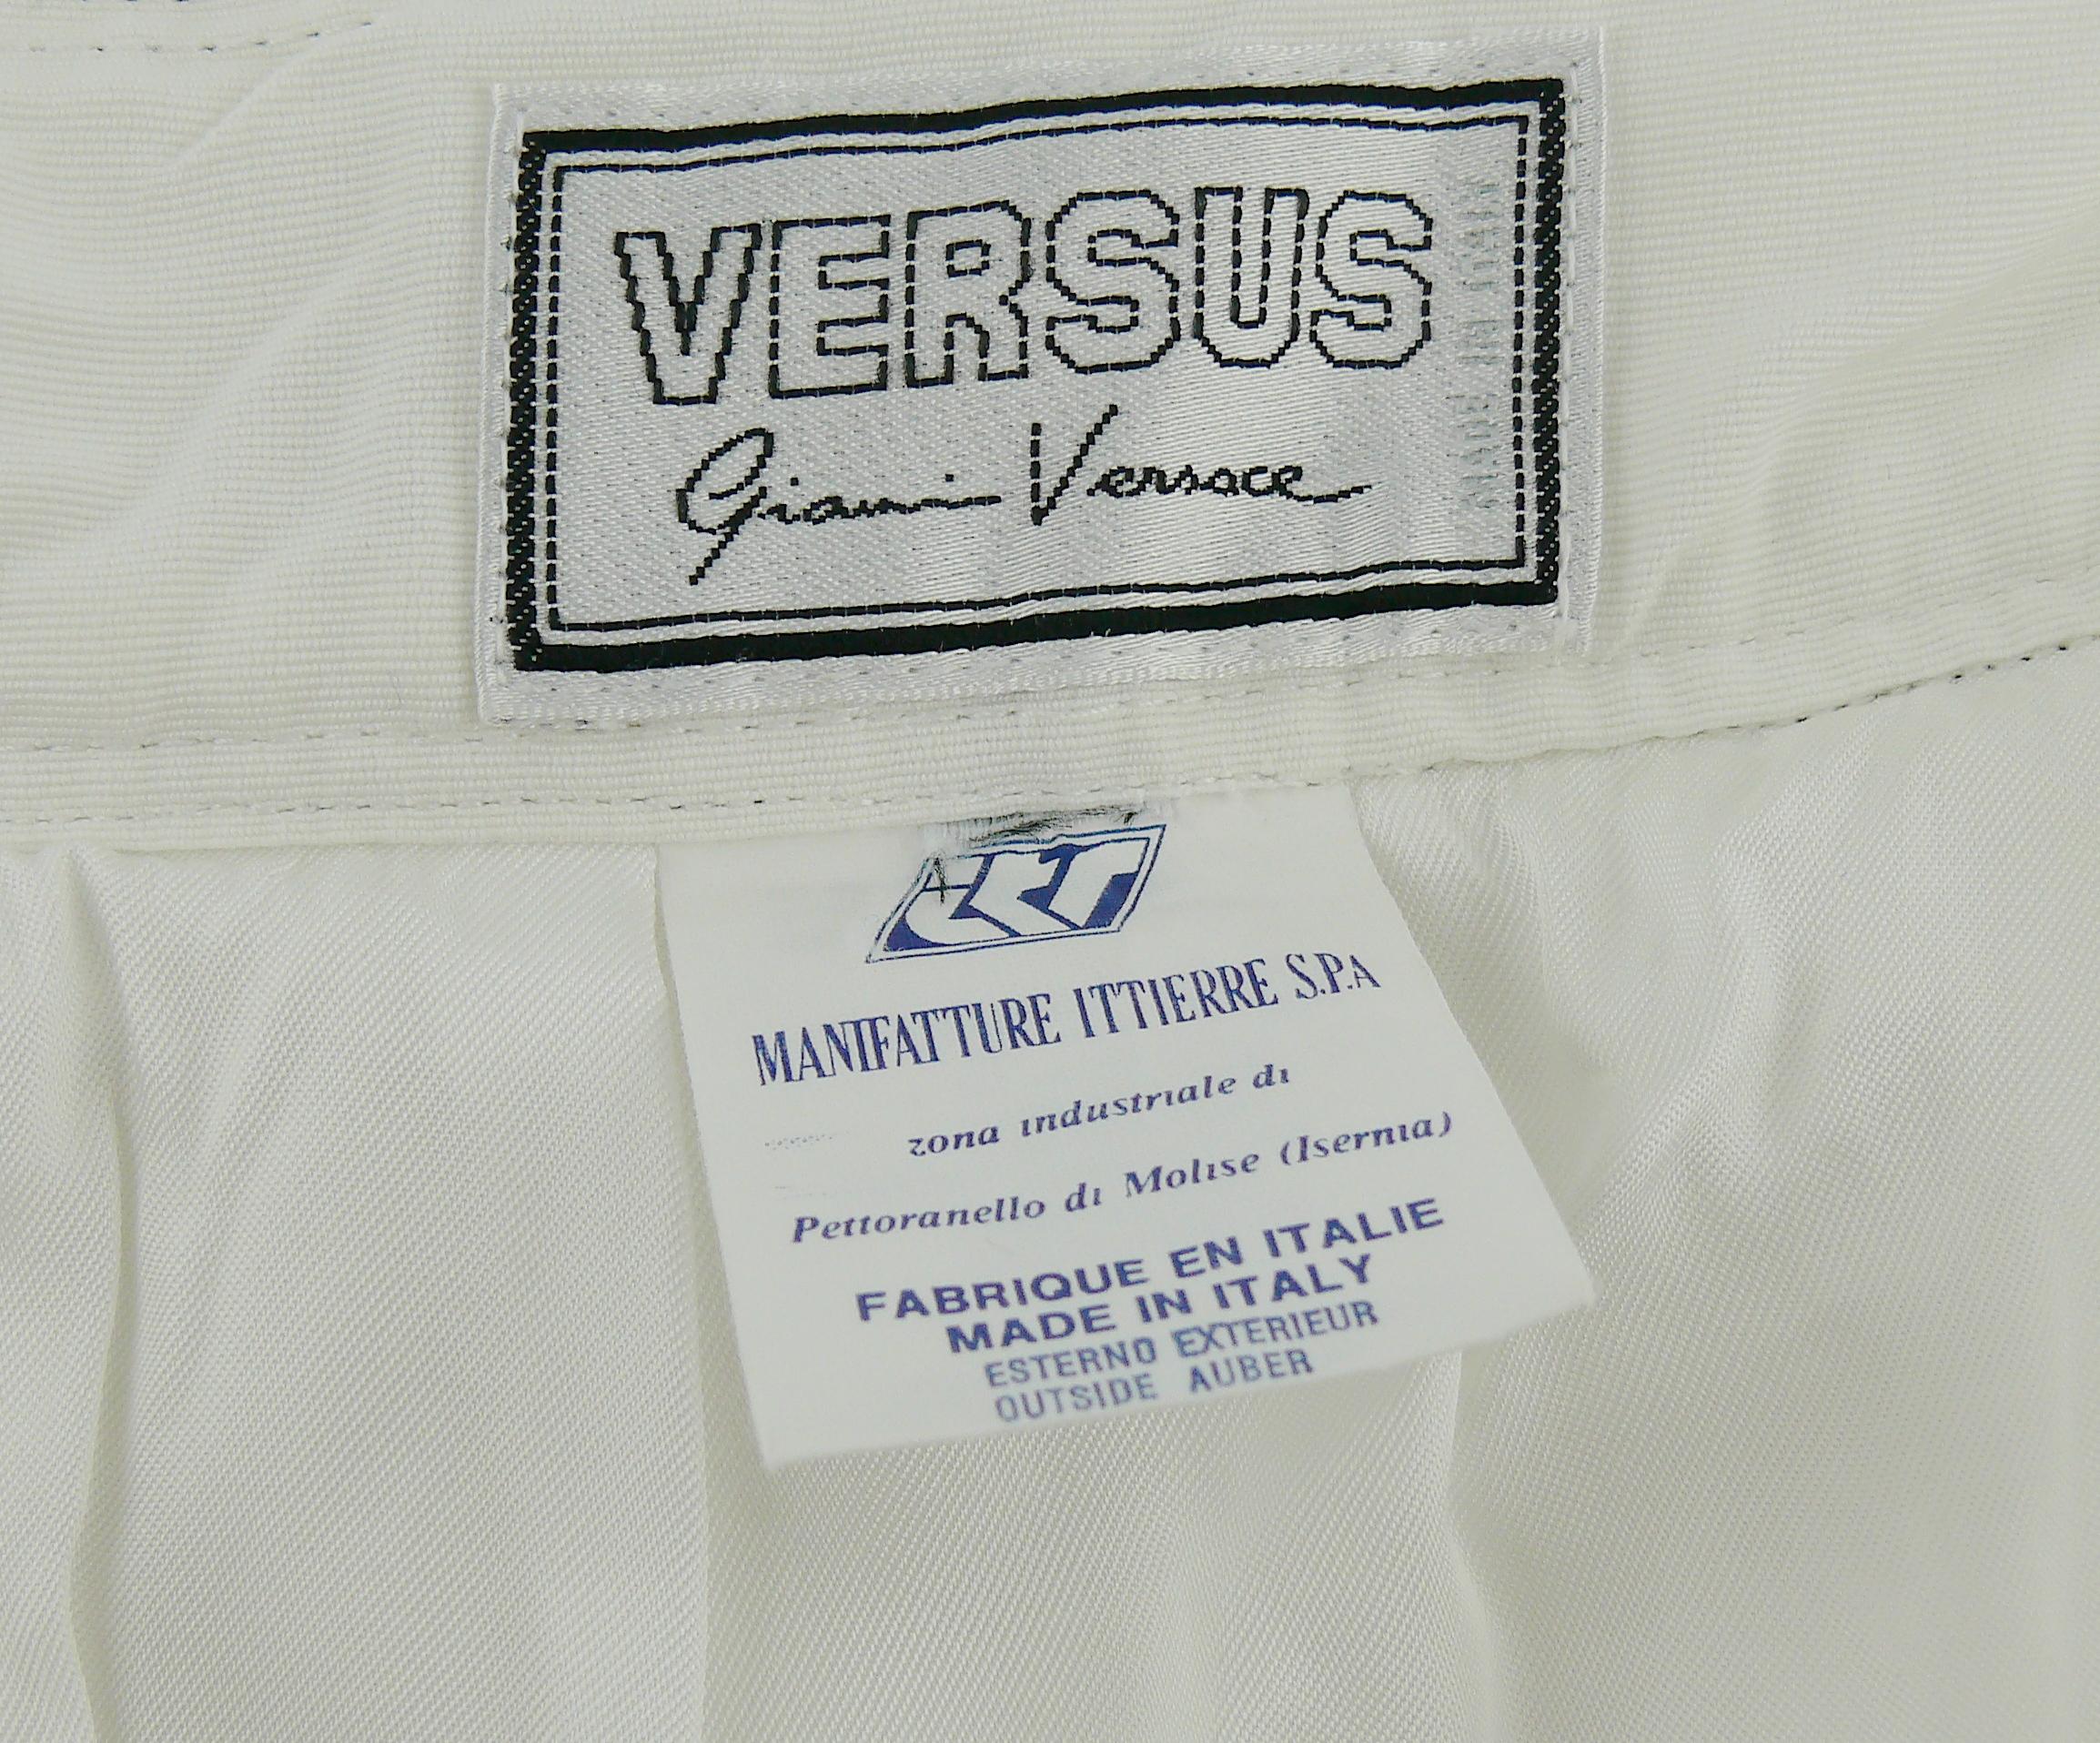 Gianni Versace Versus Vintage White Jacket & Skirt Ensemble with Western Details For Sale 2